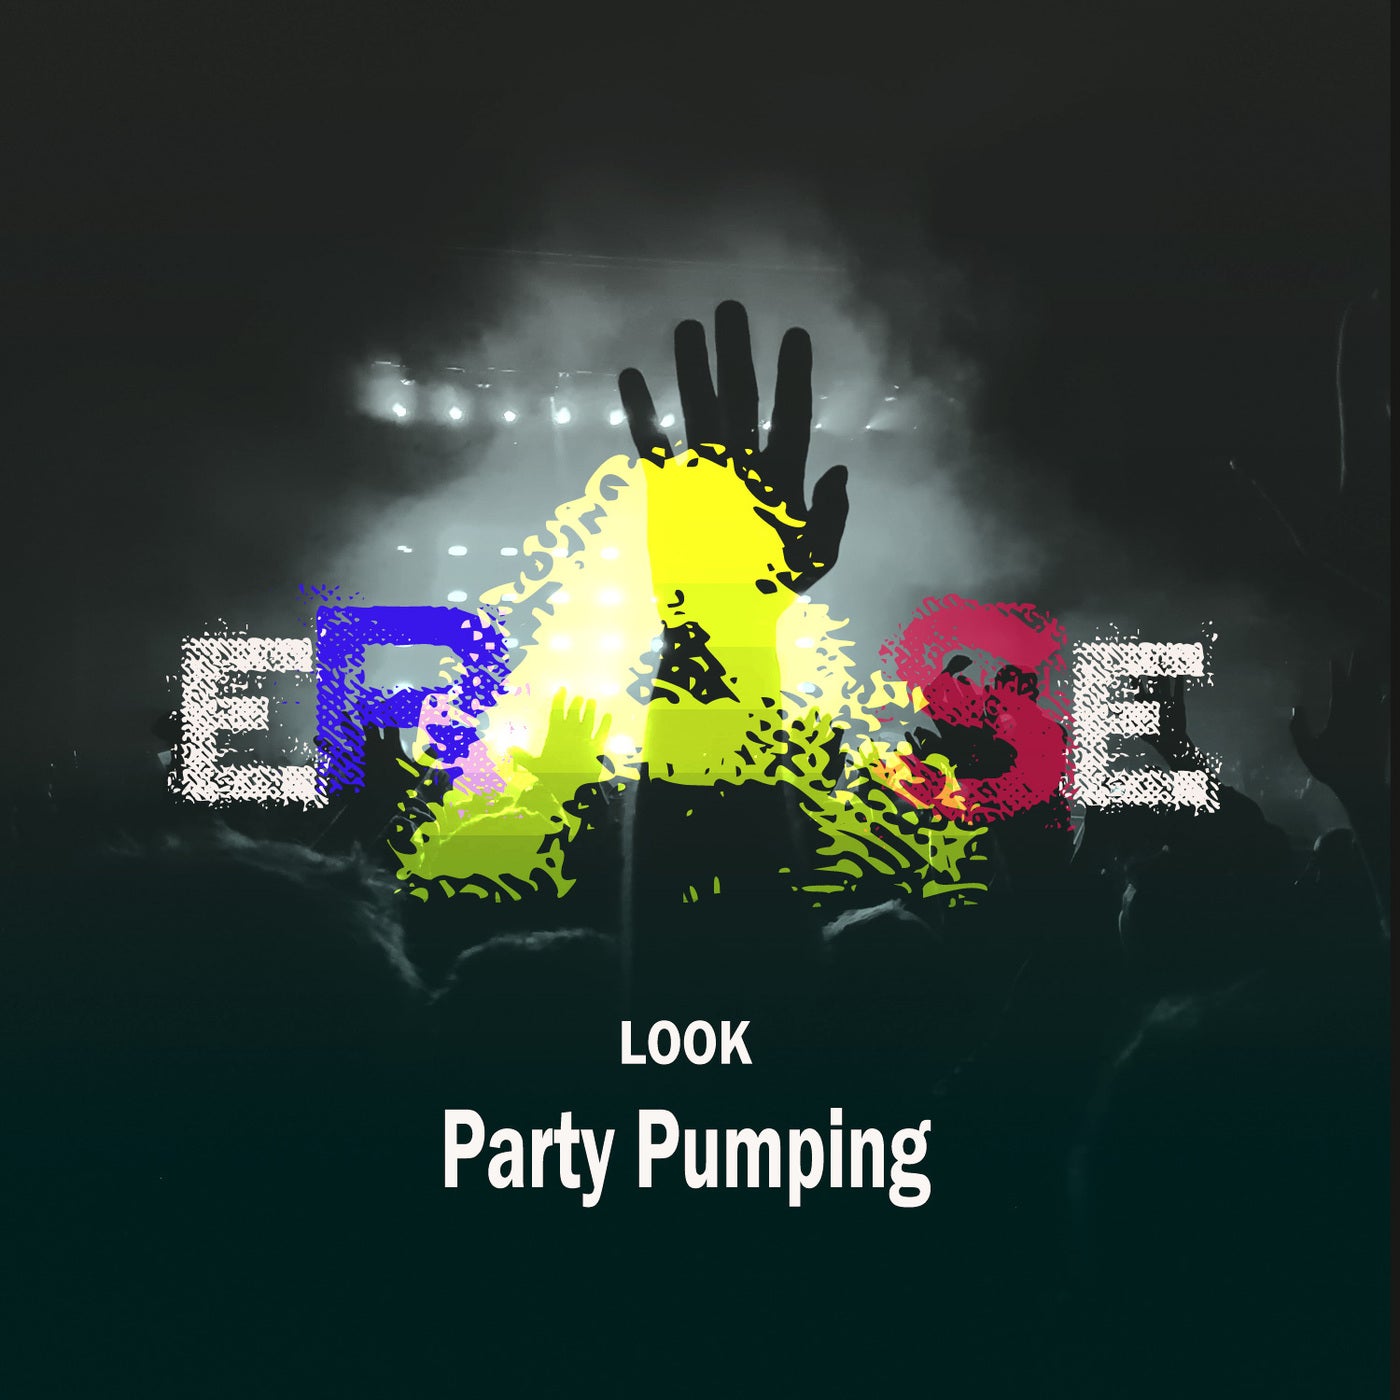 Party Pumping